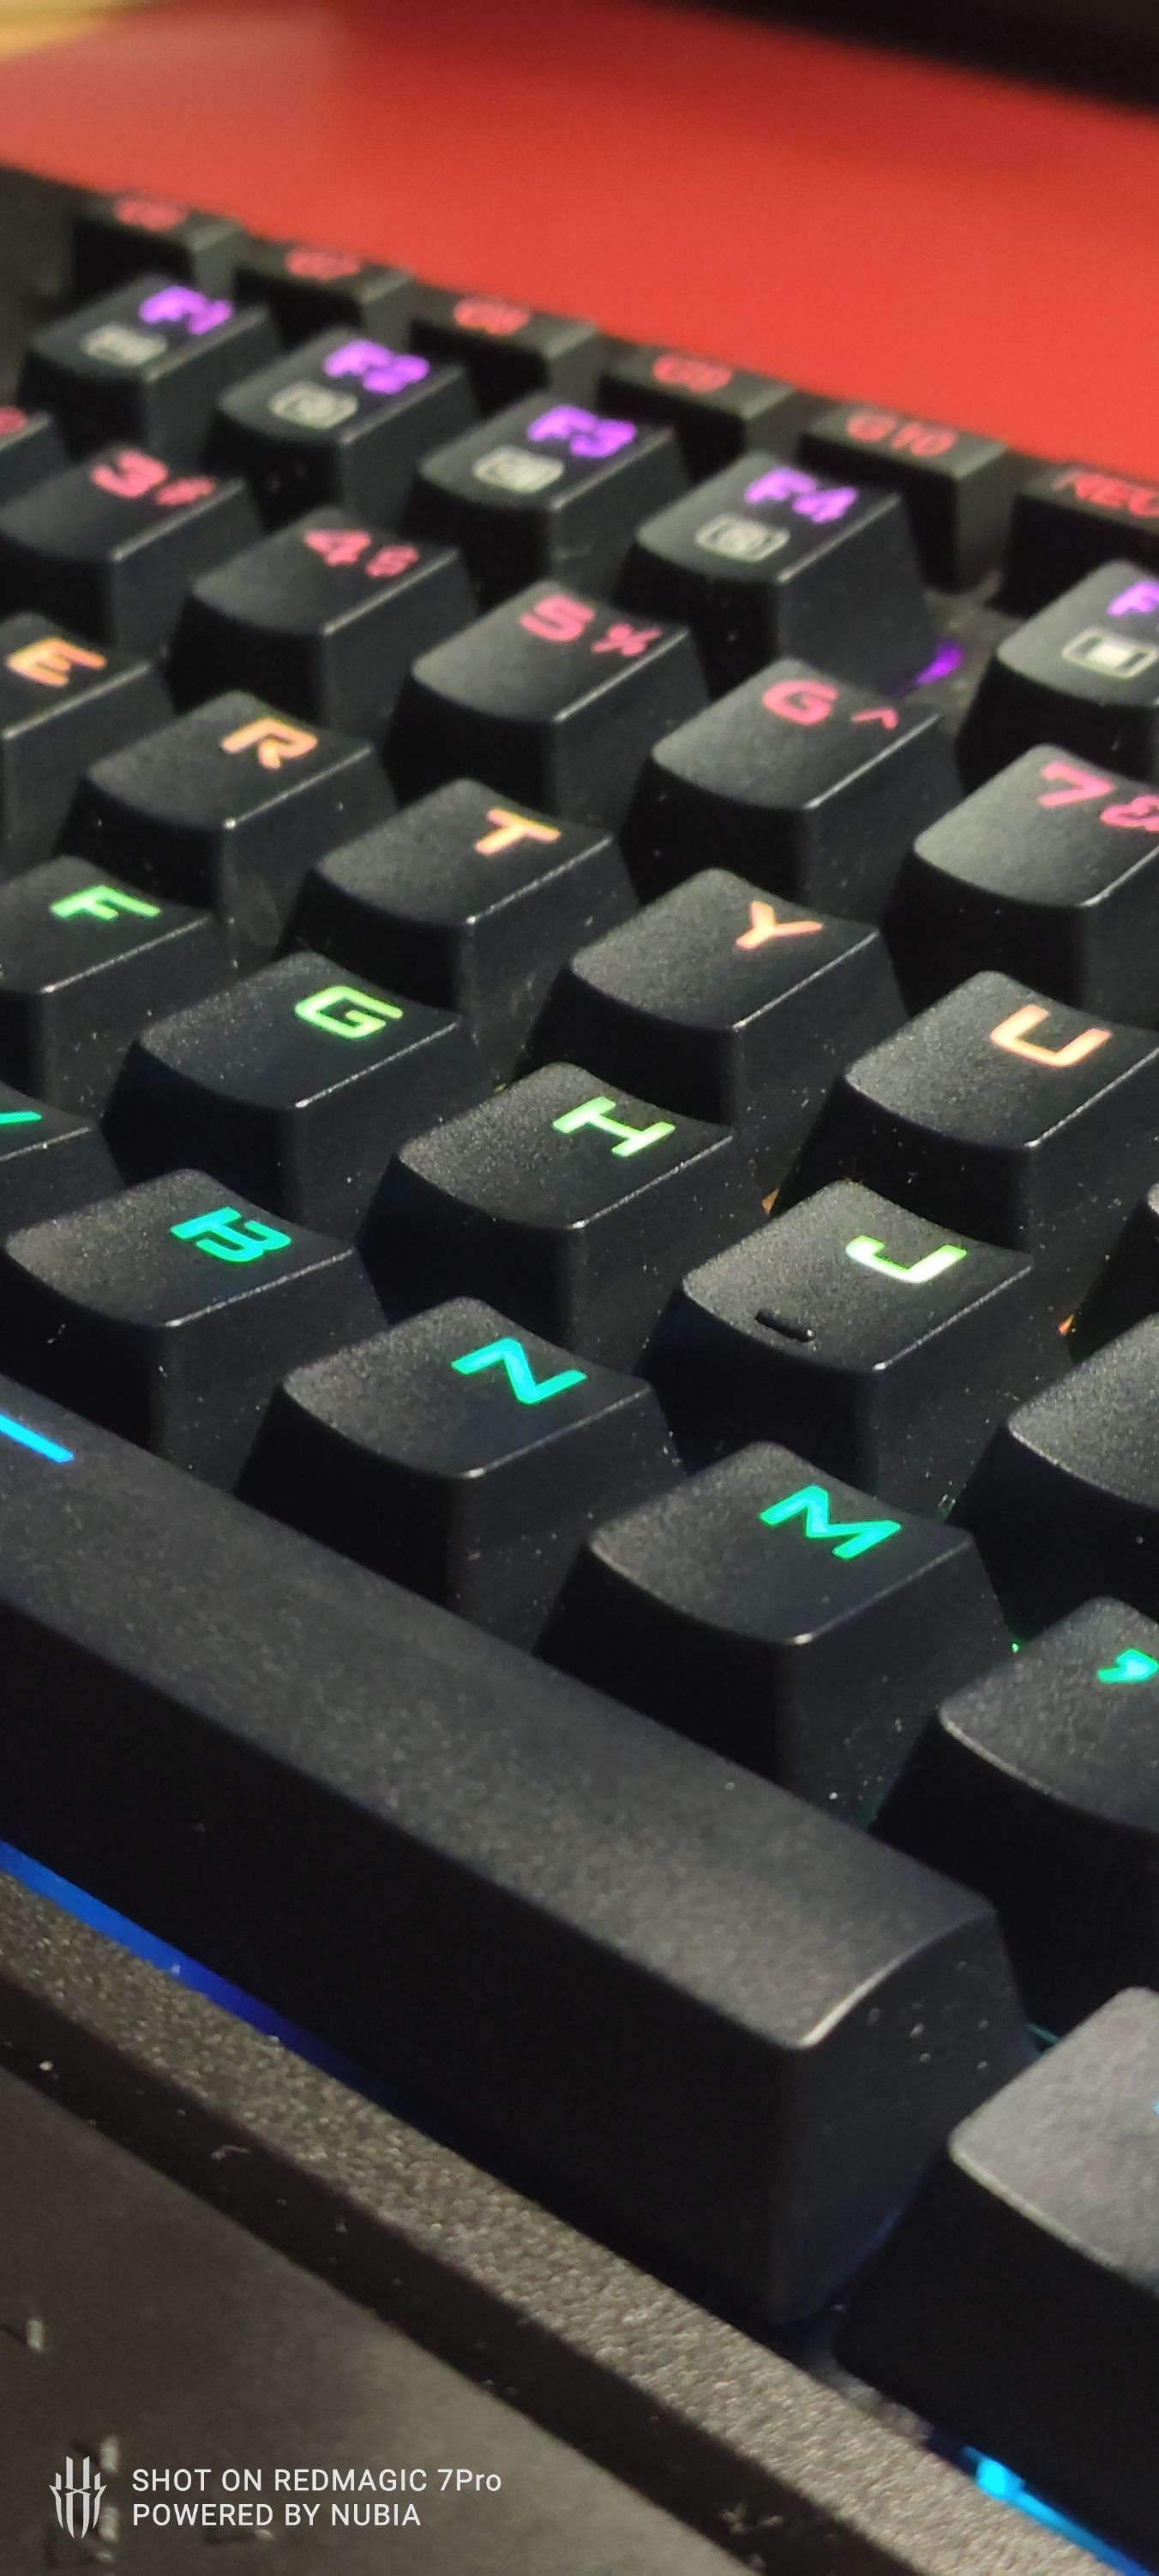 keys on a Redragon keyboard photographed with the Redmagic 7 Pro